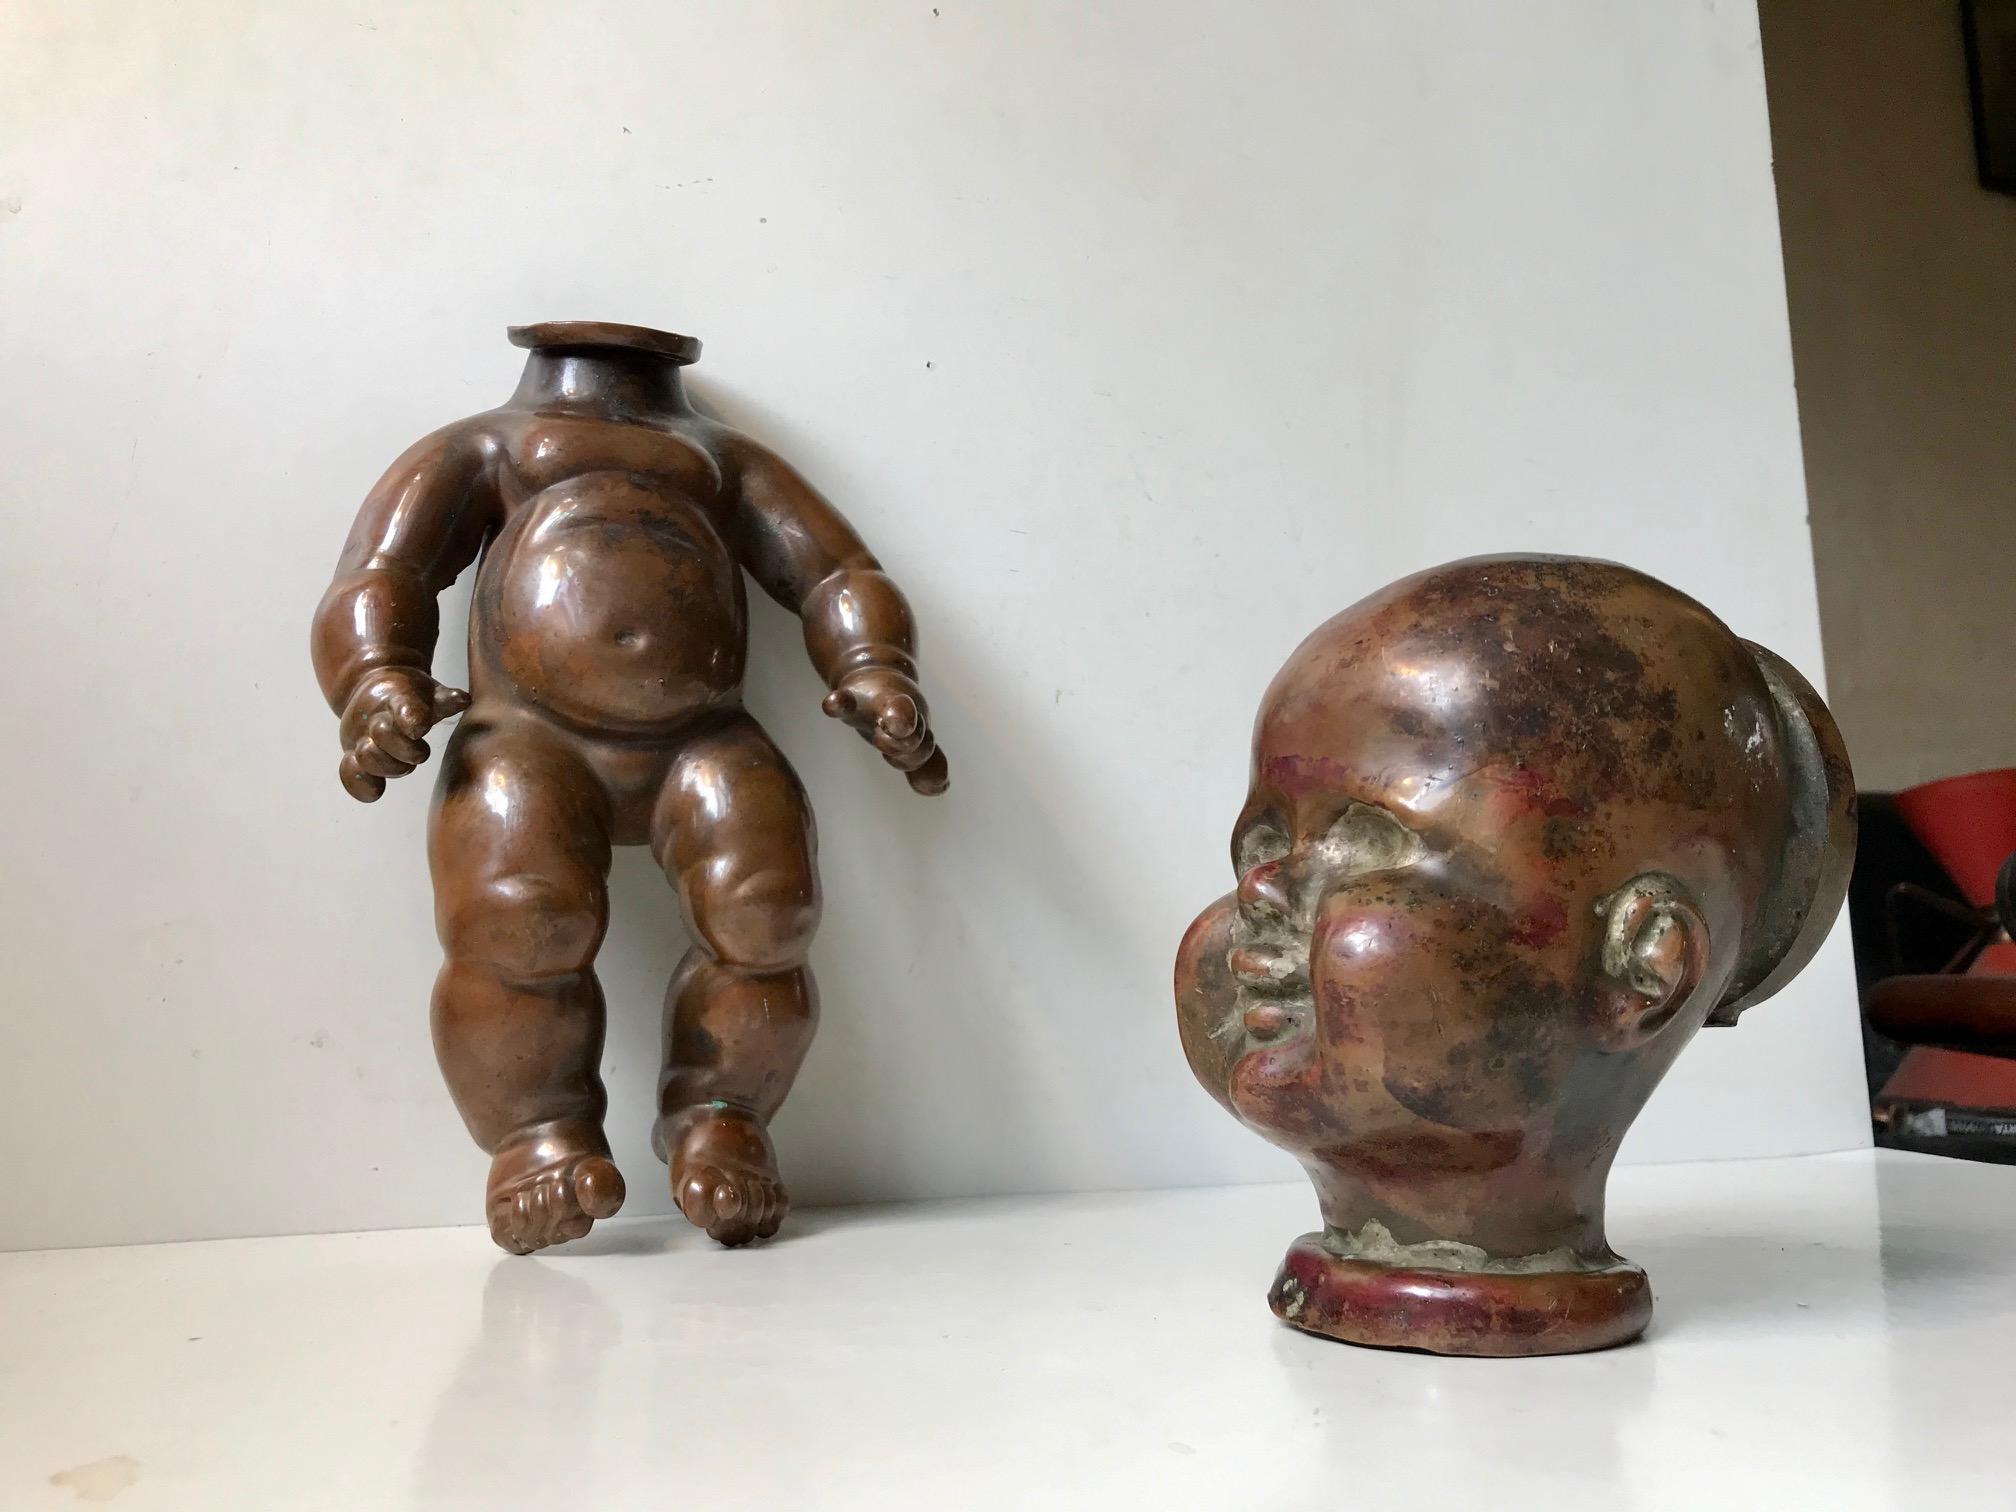 Complete and intact French doll mold in solid copper. Very early industrially used mold for production of rubber dolls. You very rarely see the body and head together. The mold is unusually detailed to the outside. Both parts has developed a